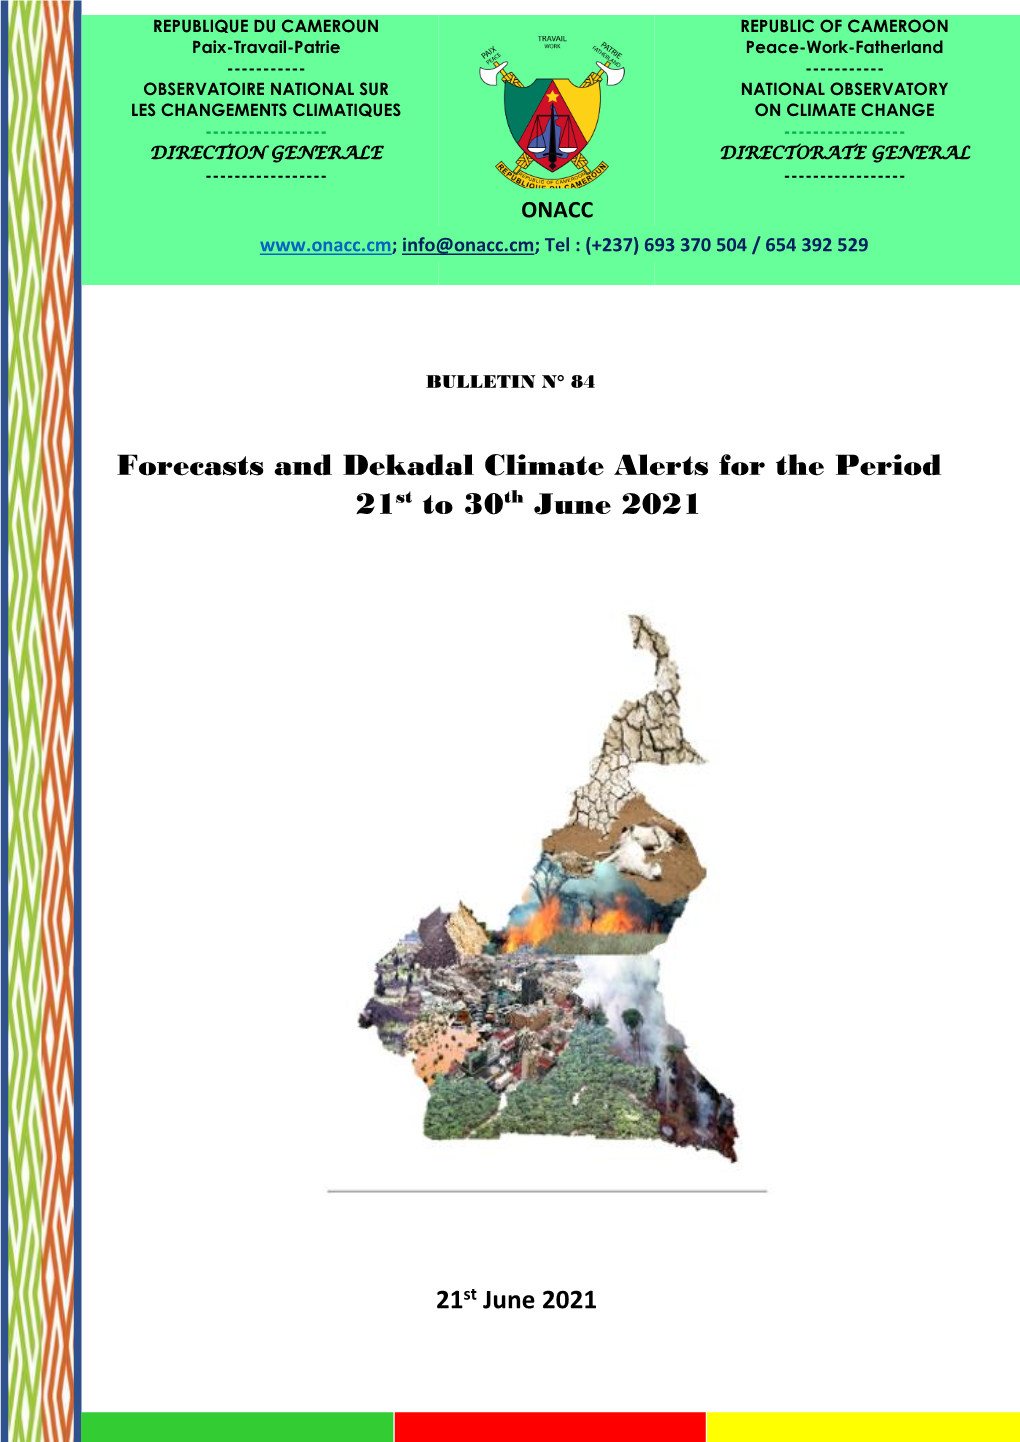 Forecasts and Dekadal Climate Alerts for the Period 21St to 30Th June 2021